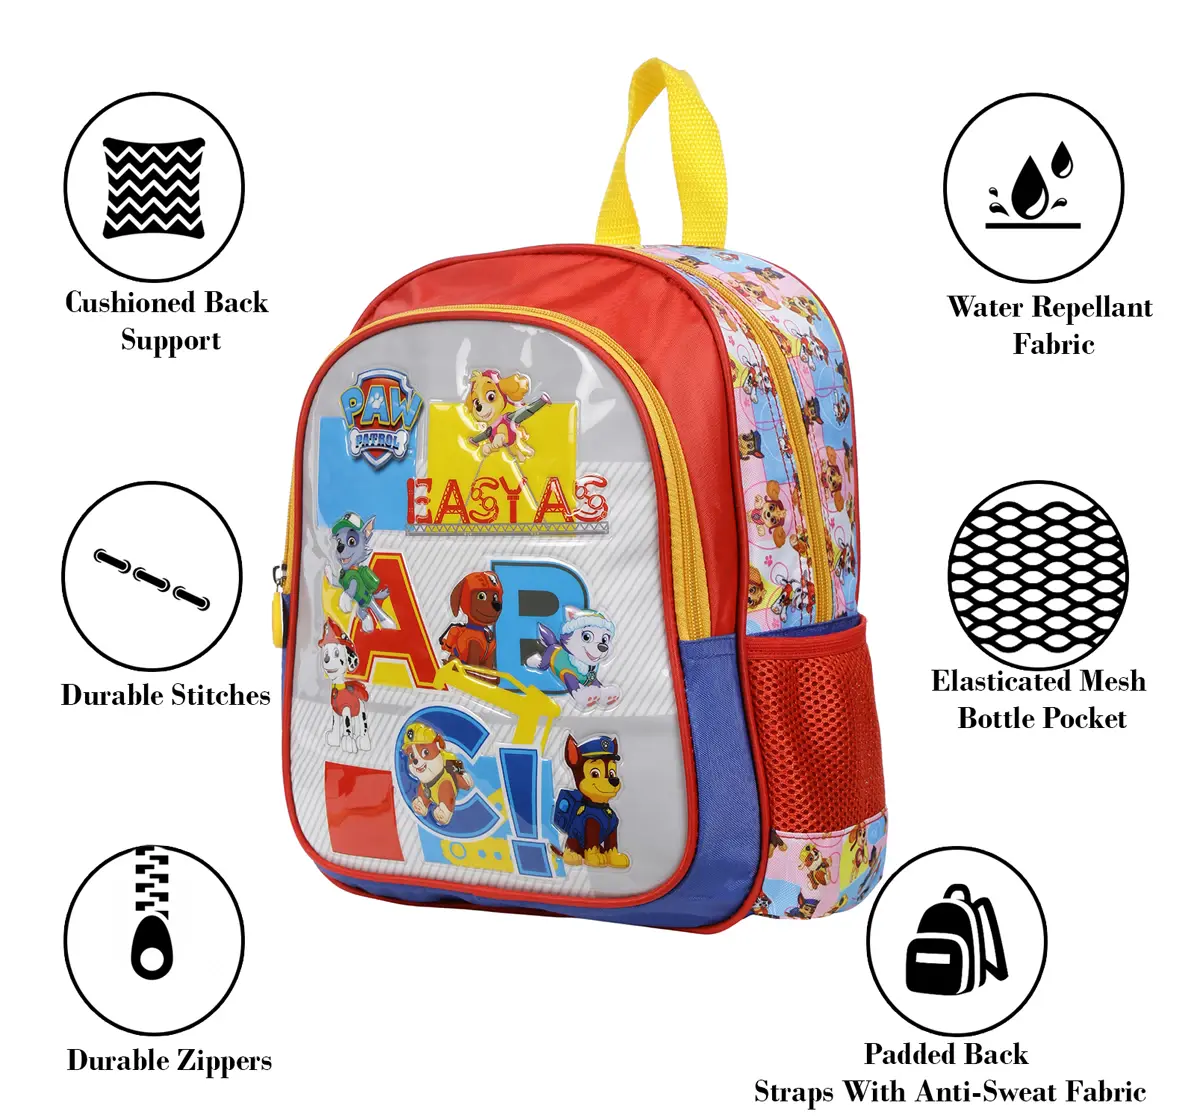 Simba Paw Patrol Easy as ABC 12 Backpack Multicolor 3Y+